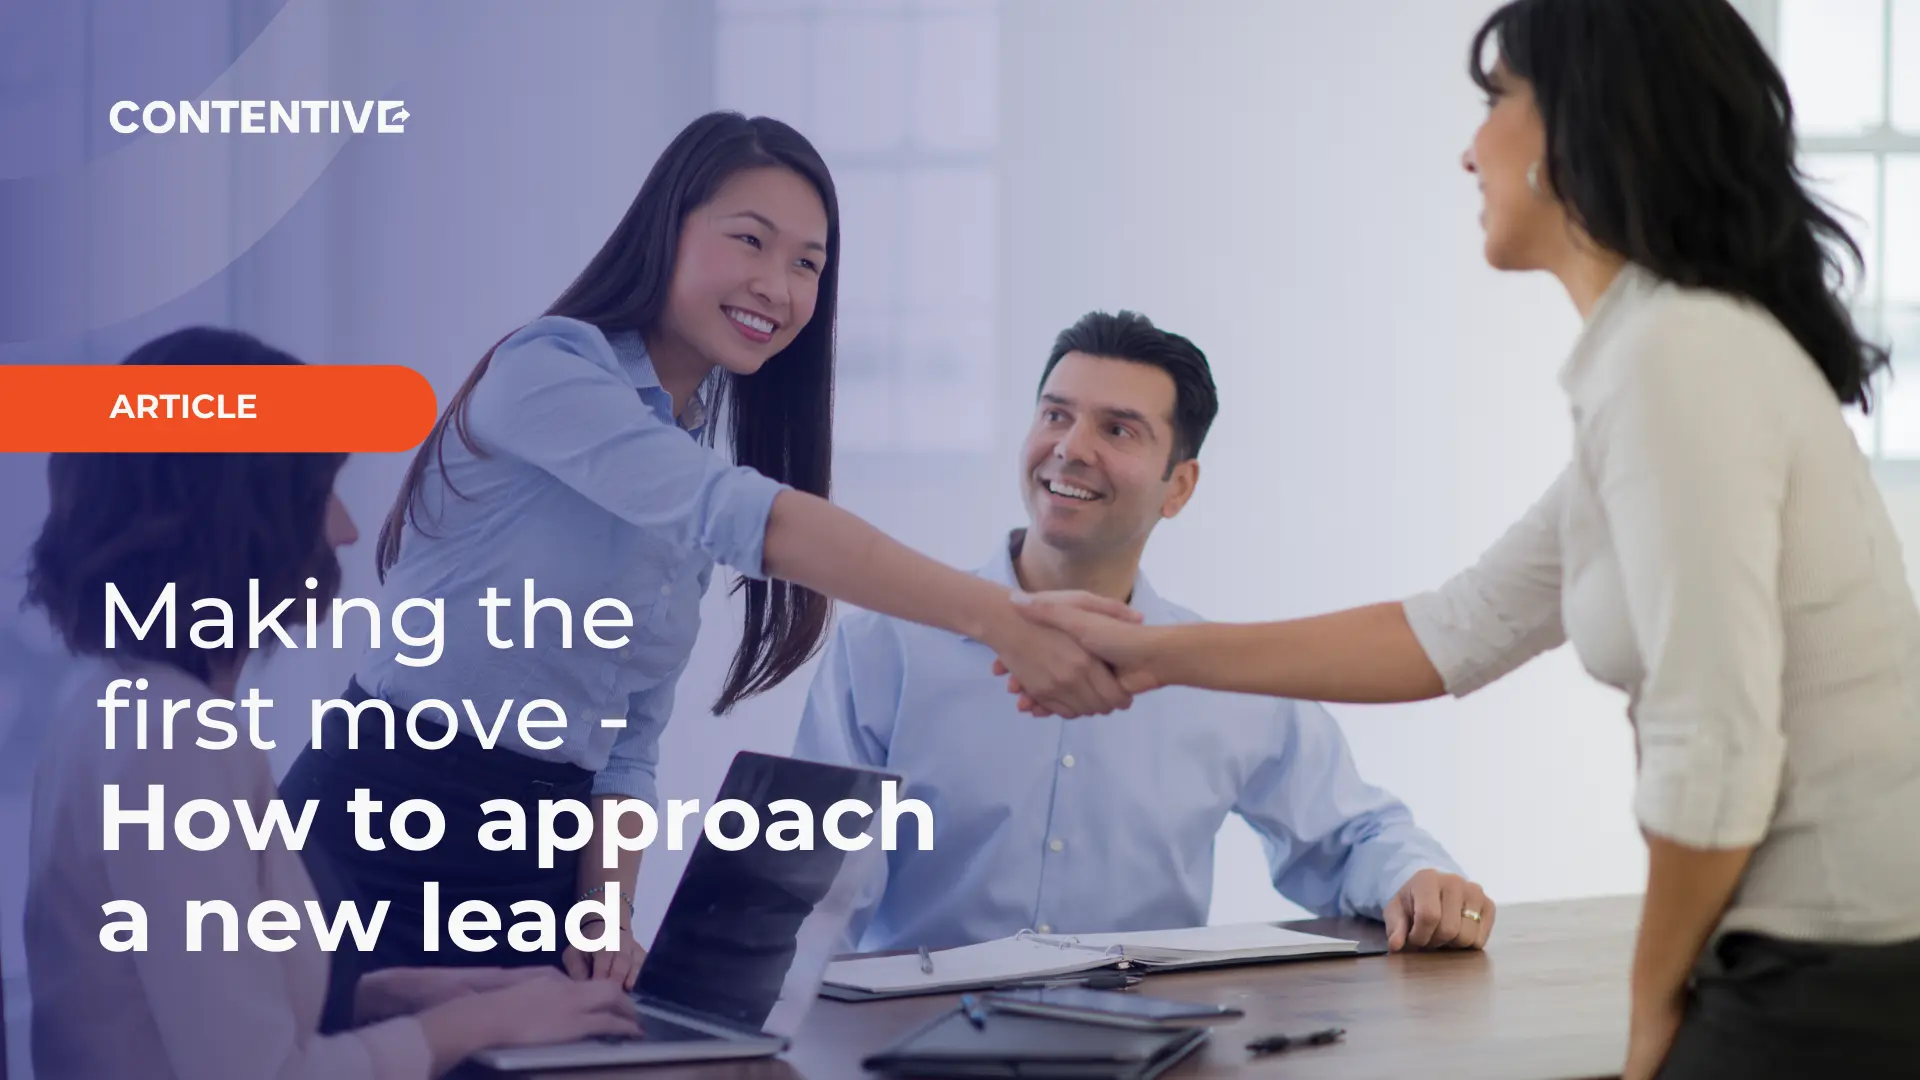 Making the first move - How to approach a new lead